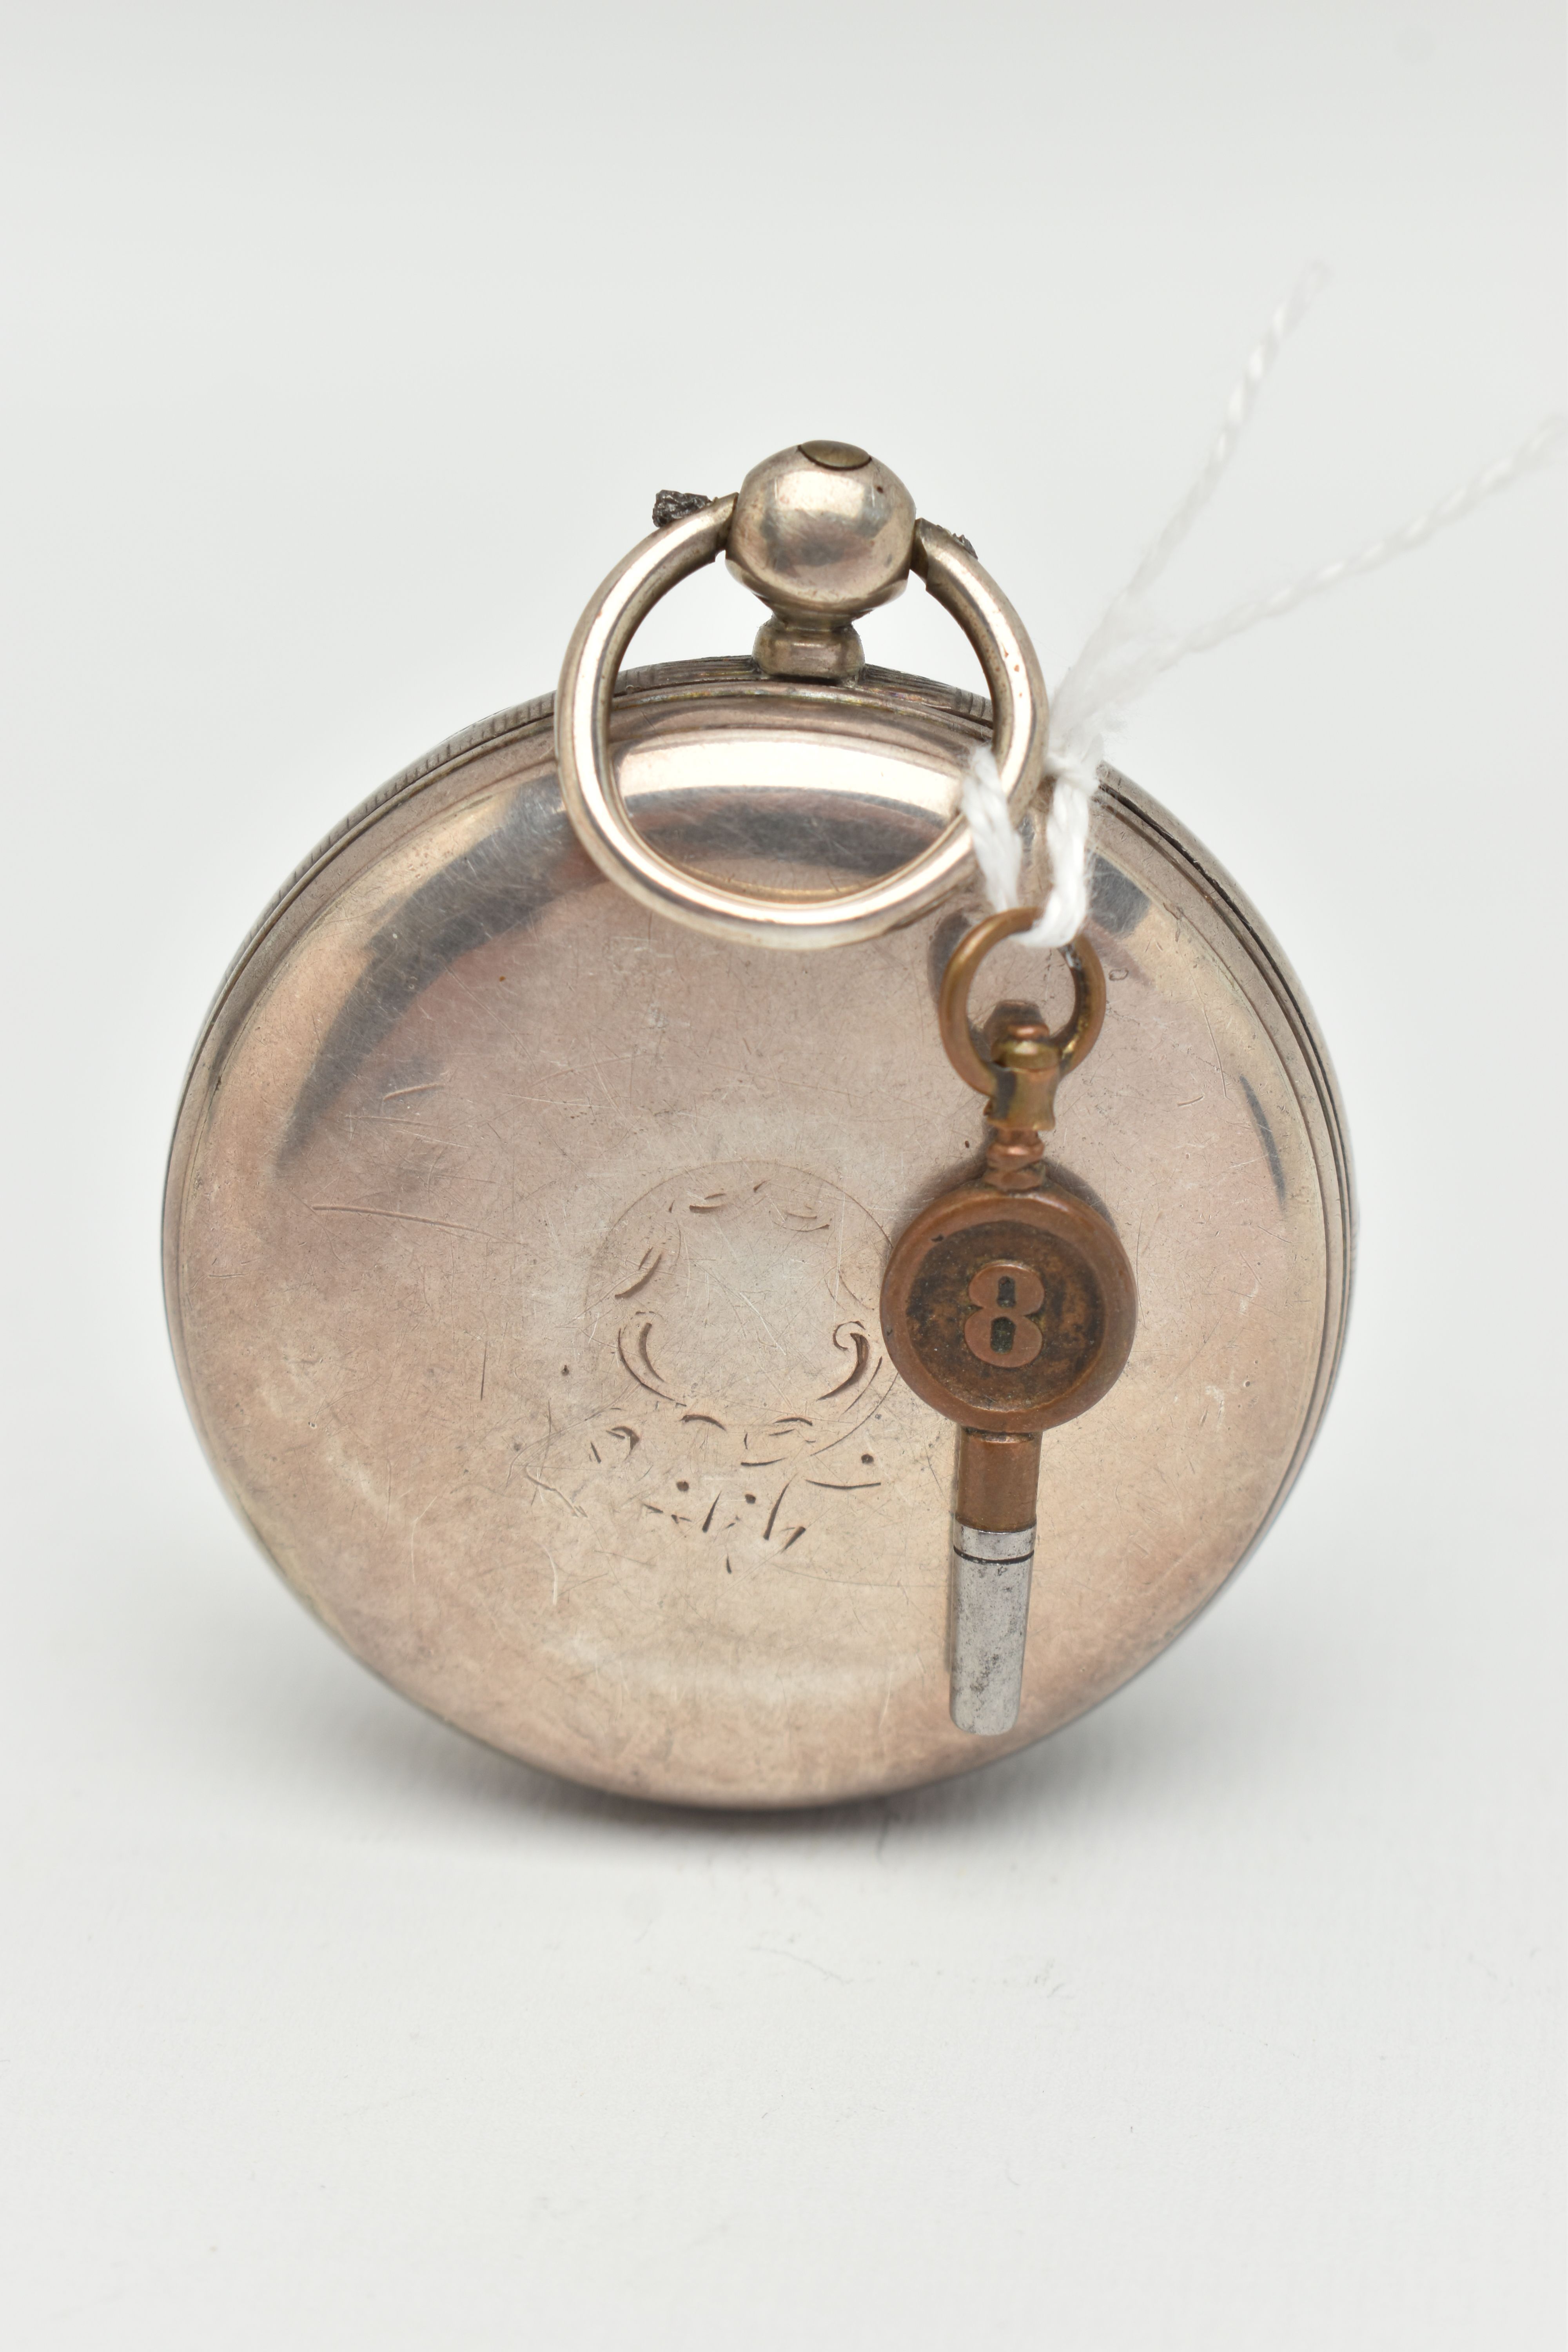 A SILVER MID VICTORIAN OPEN FACE POCKET WATCH, key wound movement, round dial, Roman numerals, - Image 2 of 5